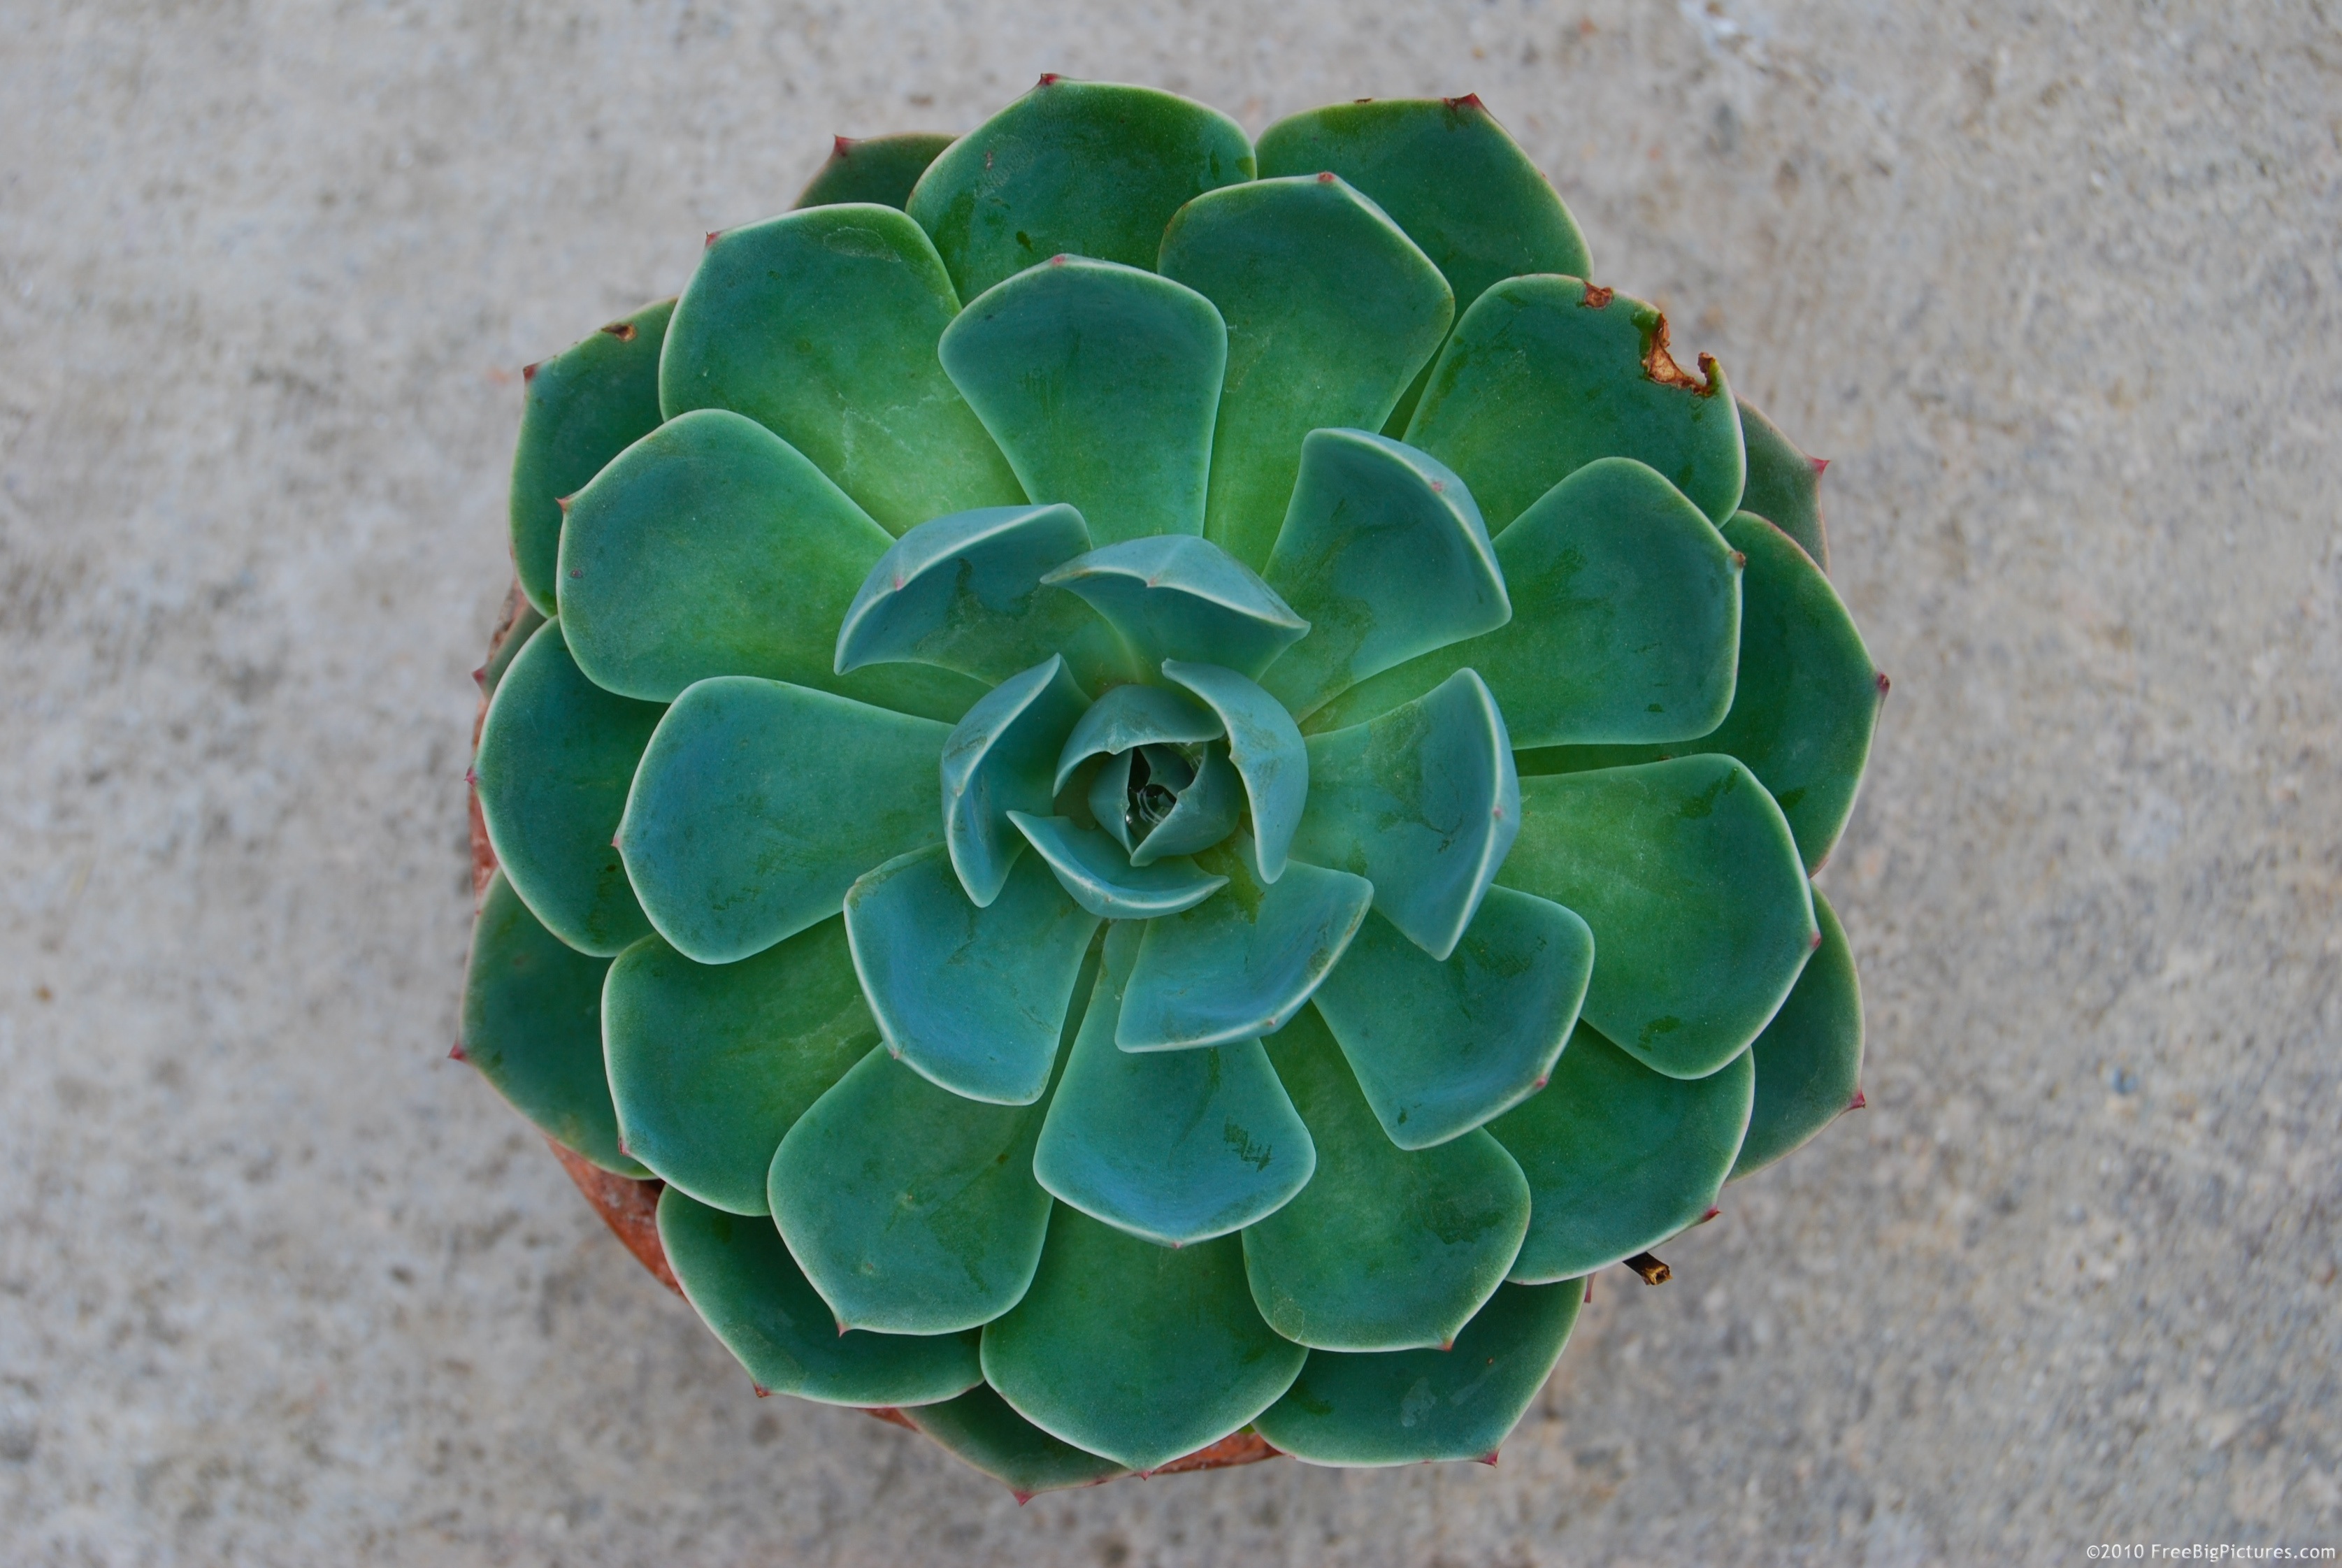 Aeonium (pinwheel), includes 35 species, all with succulent, not frost resistant leaves